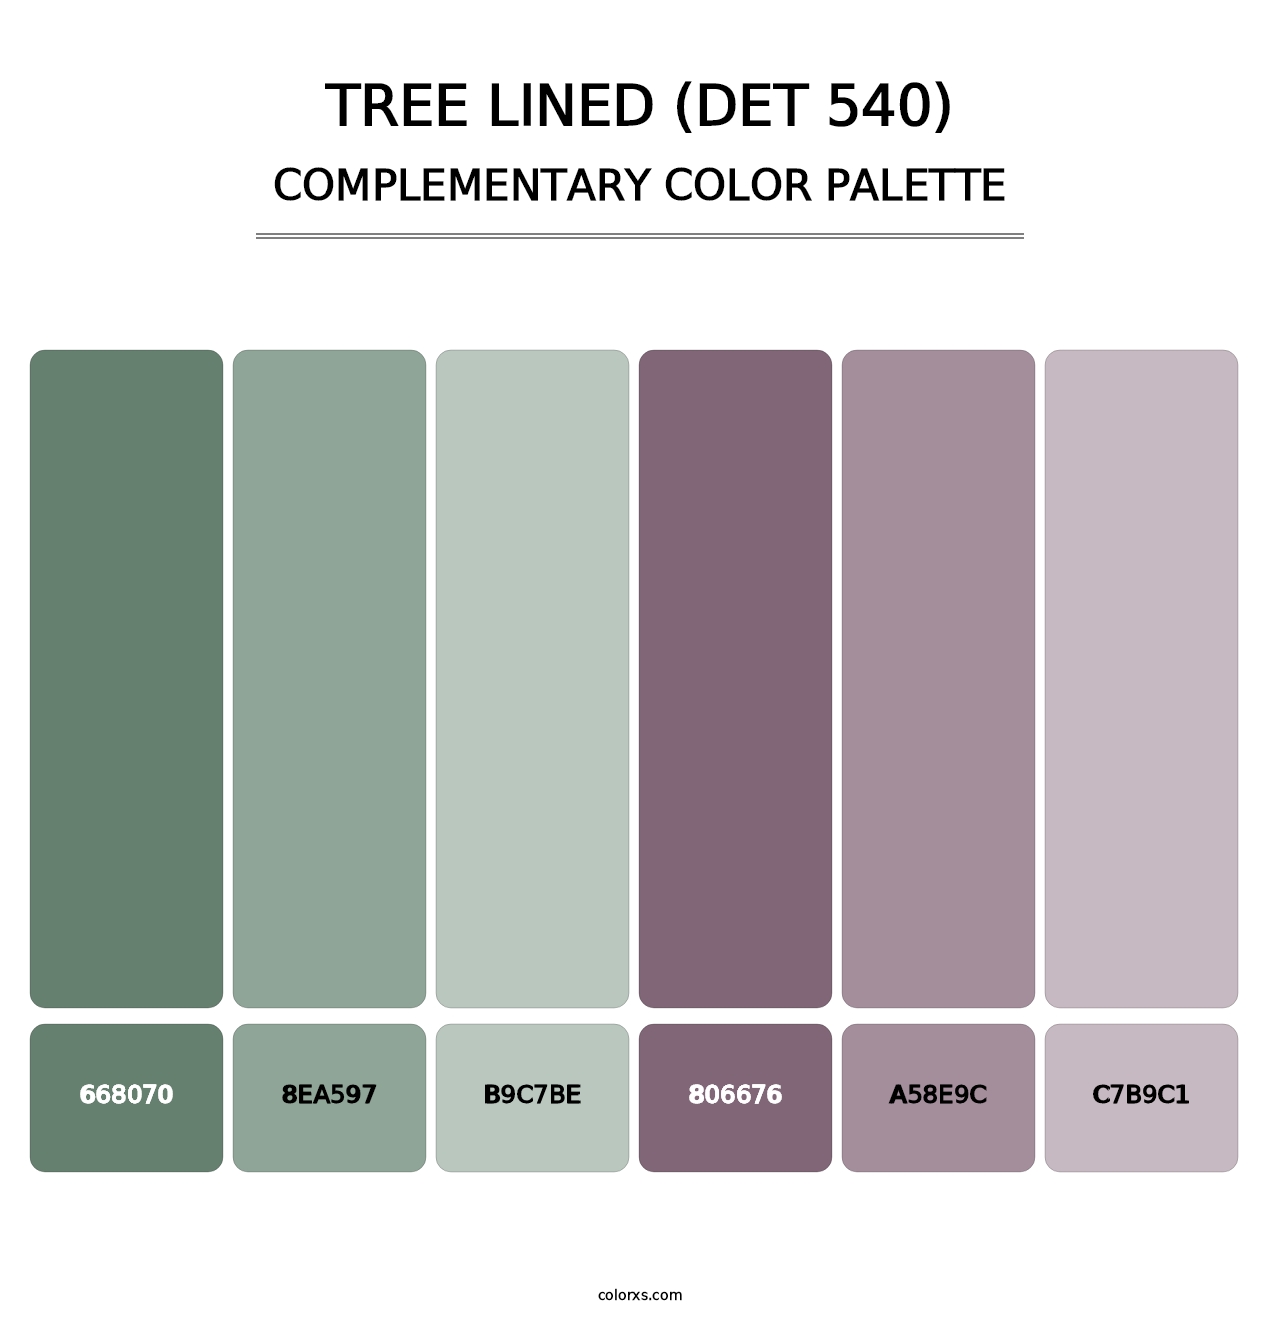 Tree Lined (DET 540) - Complementary Color Palette